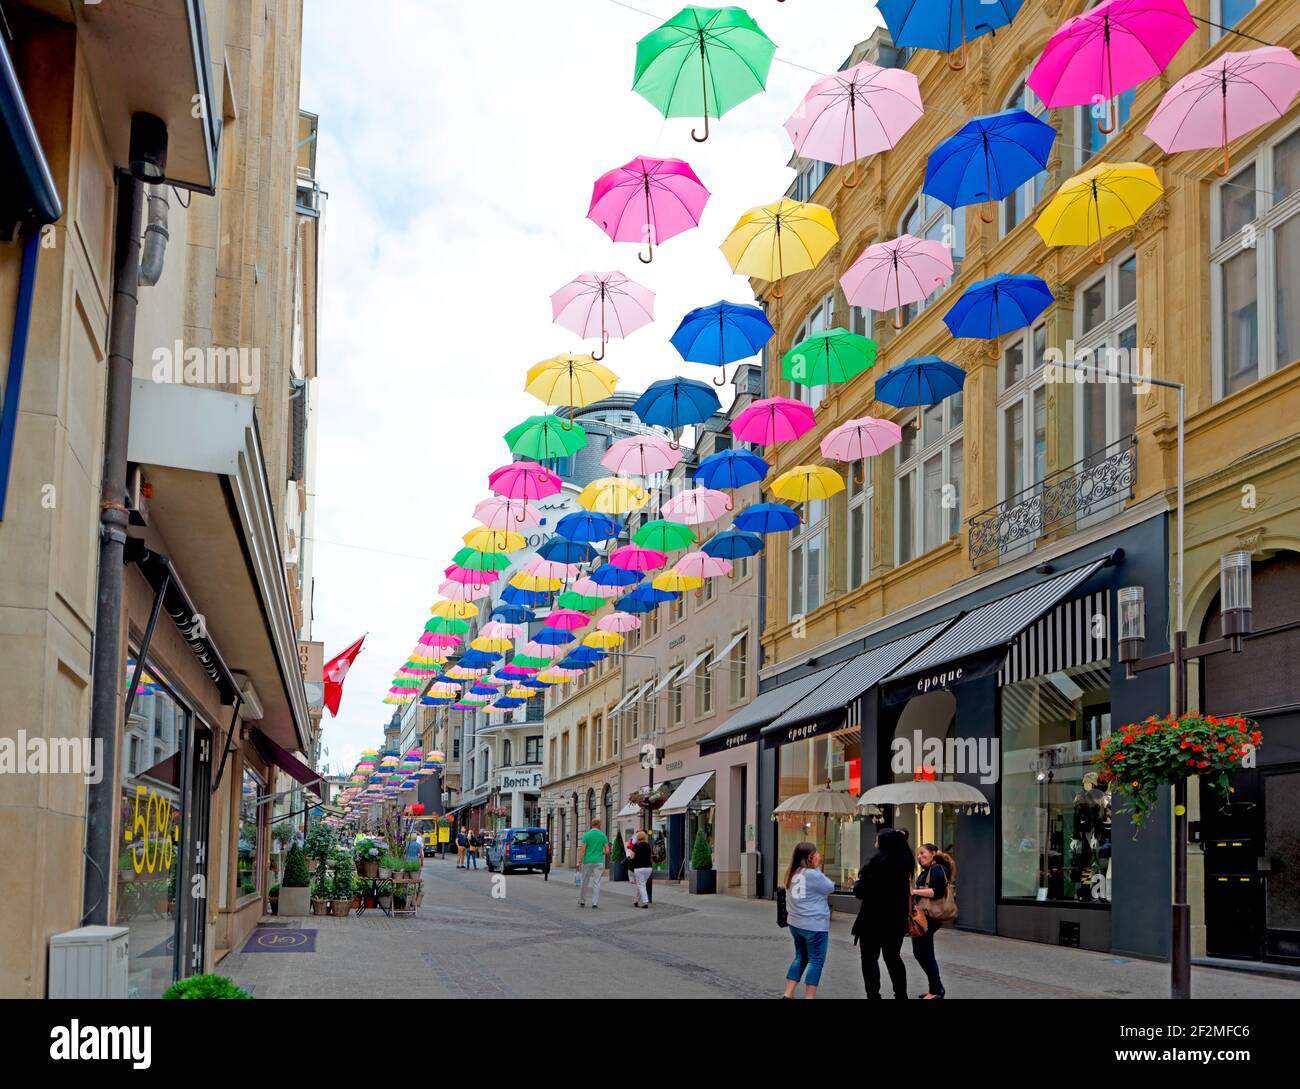 Colorful umbrellas hanging between the houses in a pedestrian zone, Luxembourg, Luxembourg City Stock Photo